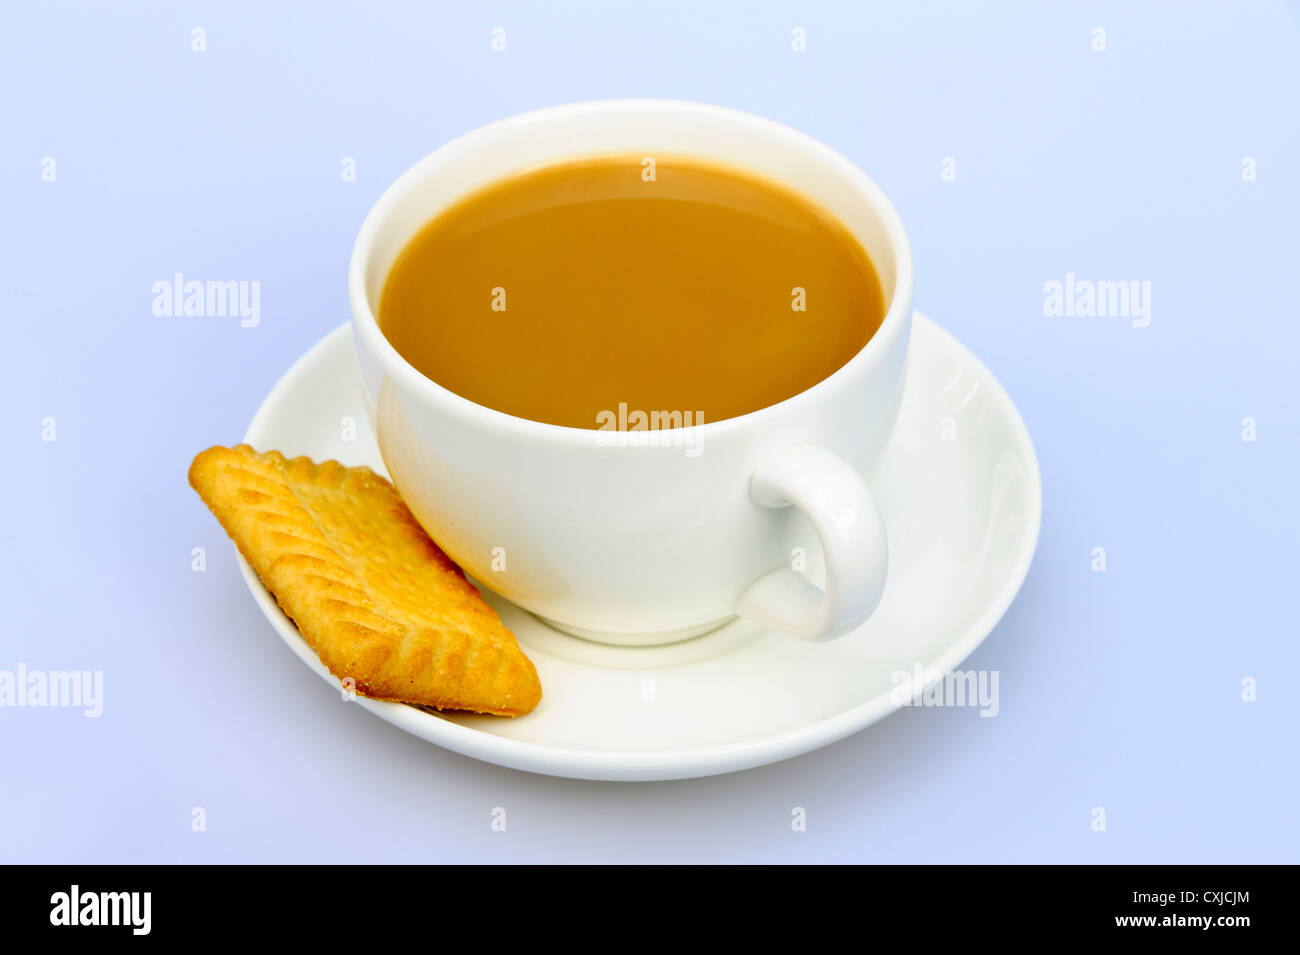 Cup of tea in a plain white cup & saucer. Tea and biscuit, UK. Stock Photo